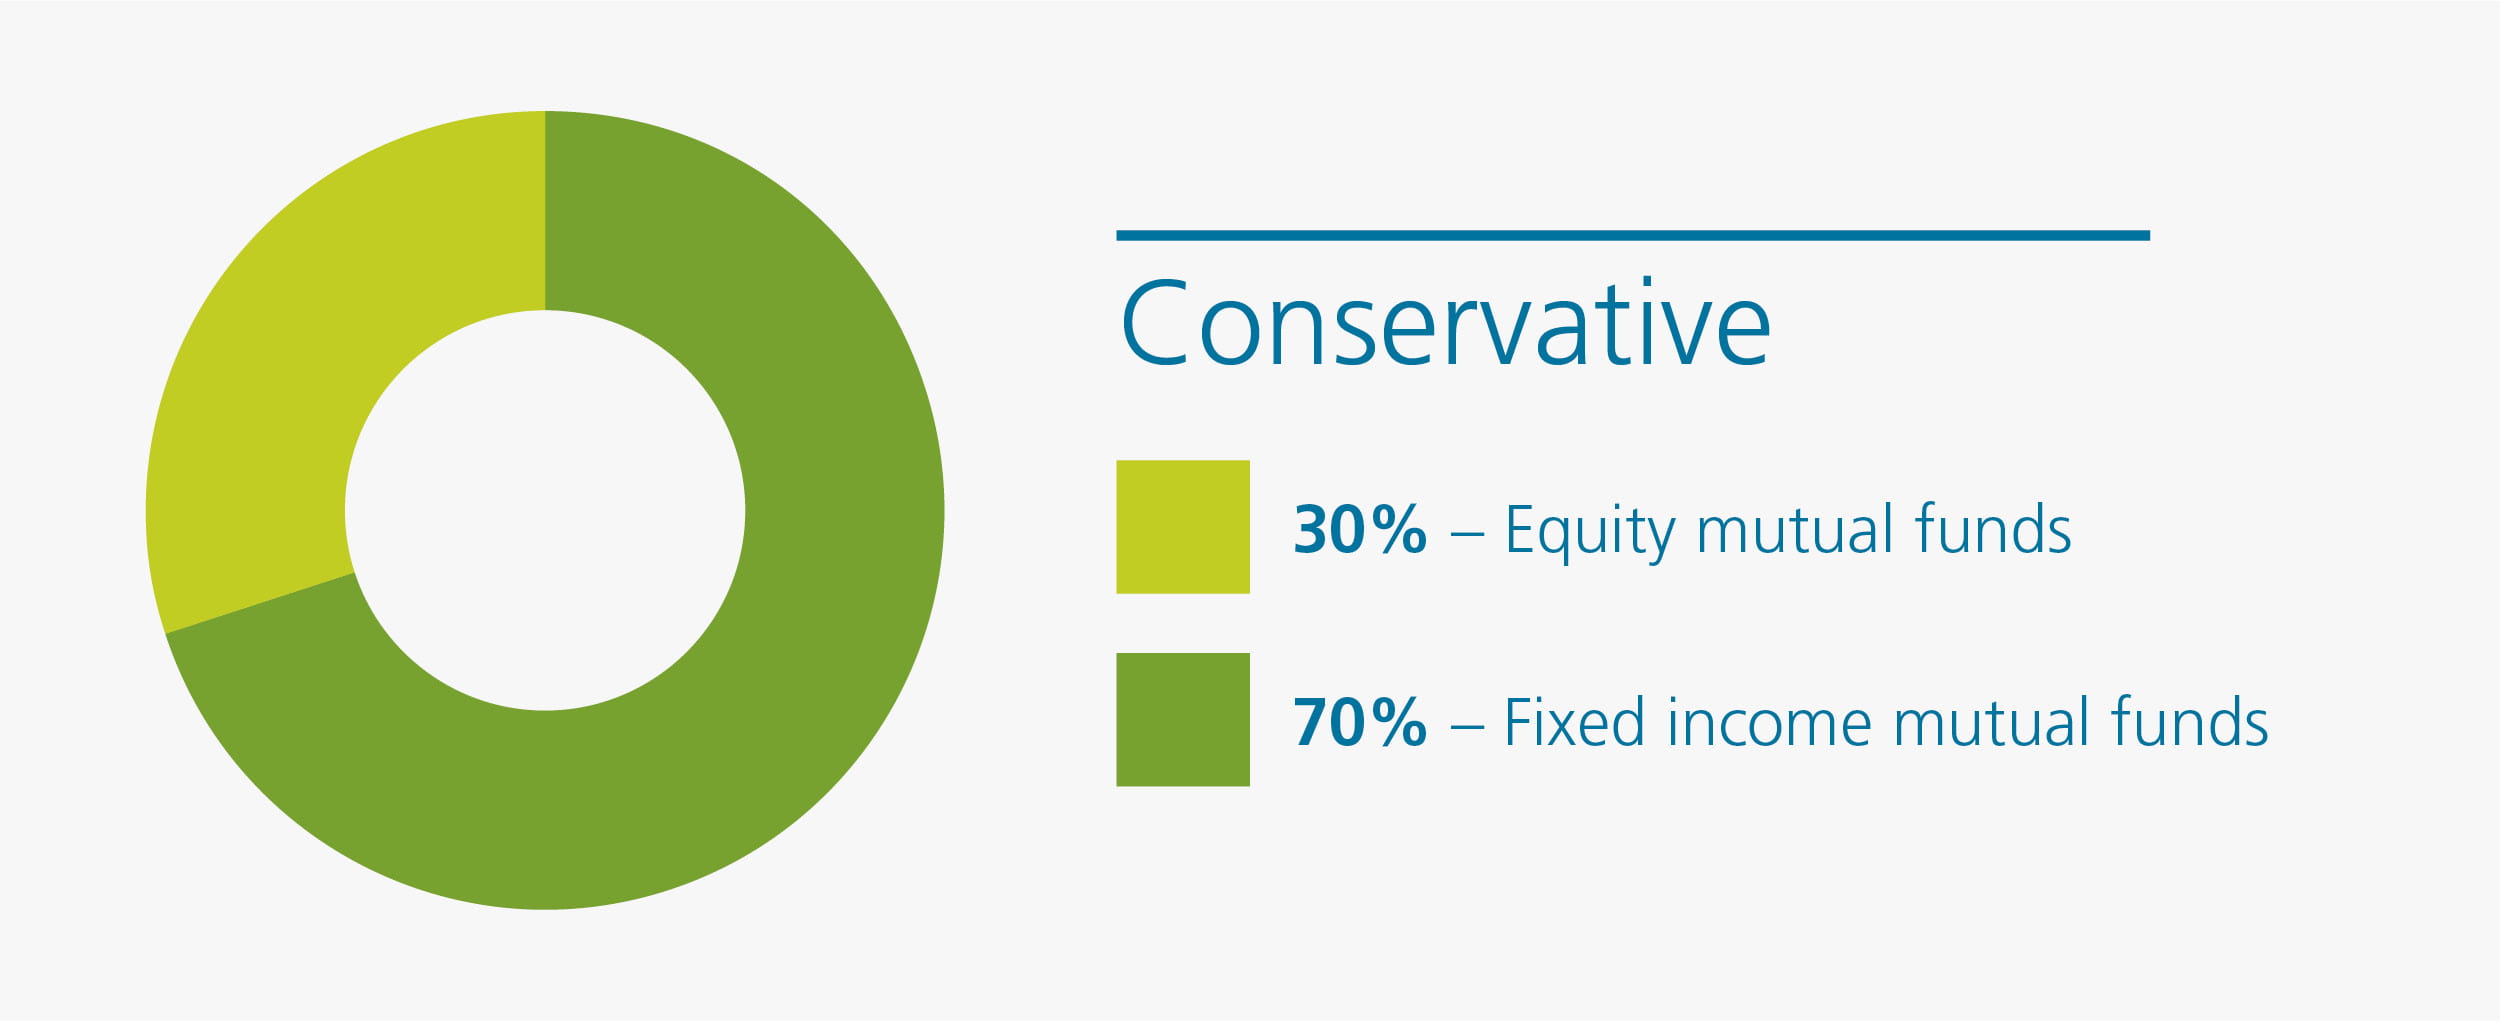 Pie chart showing 30% equity funds and 70% fixed income